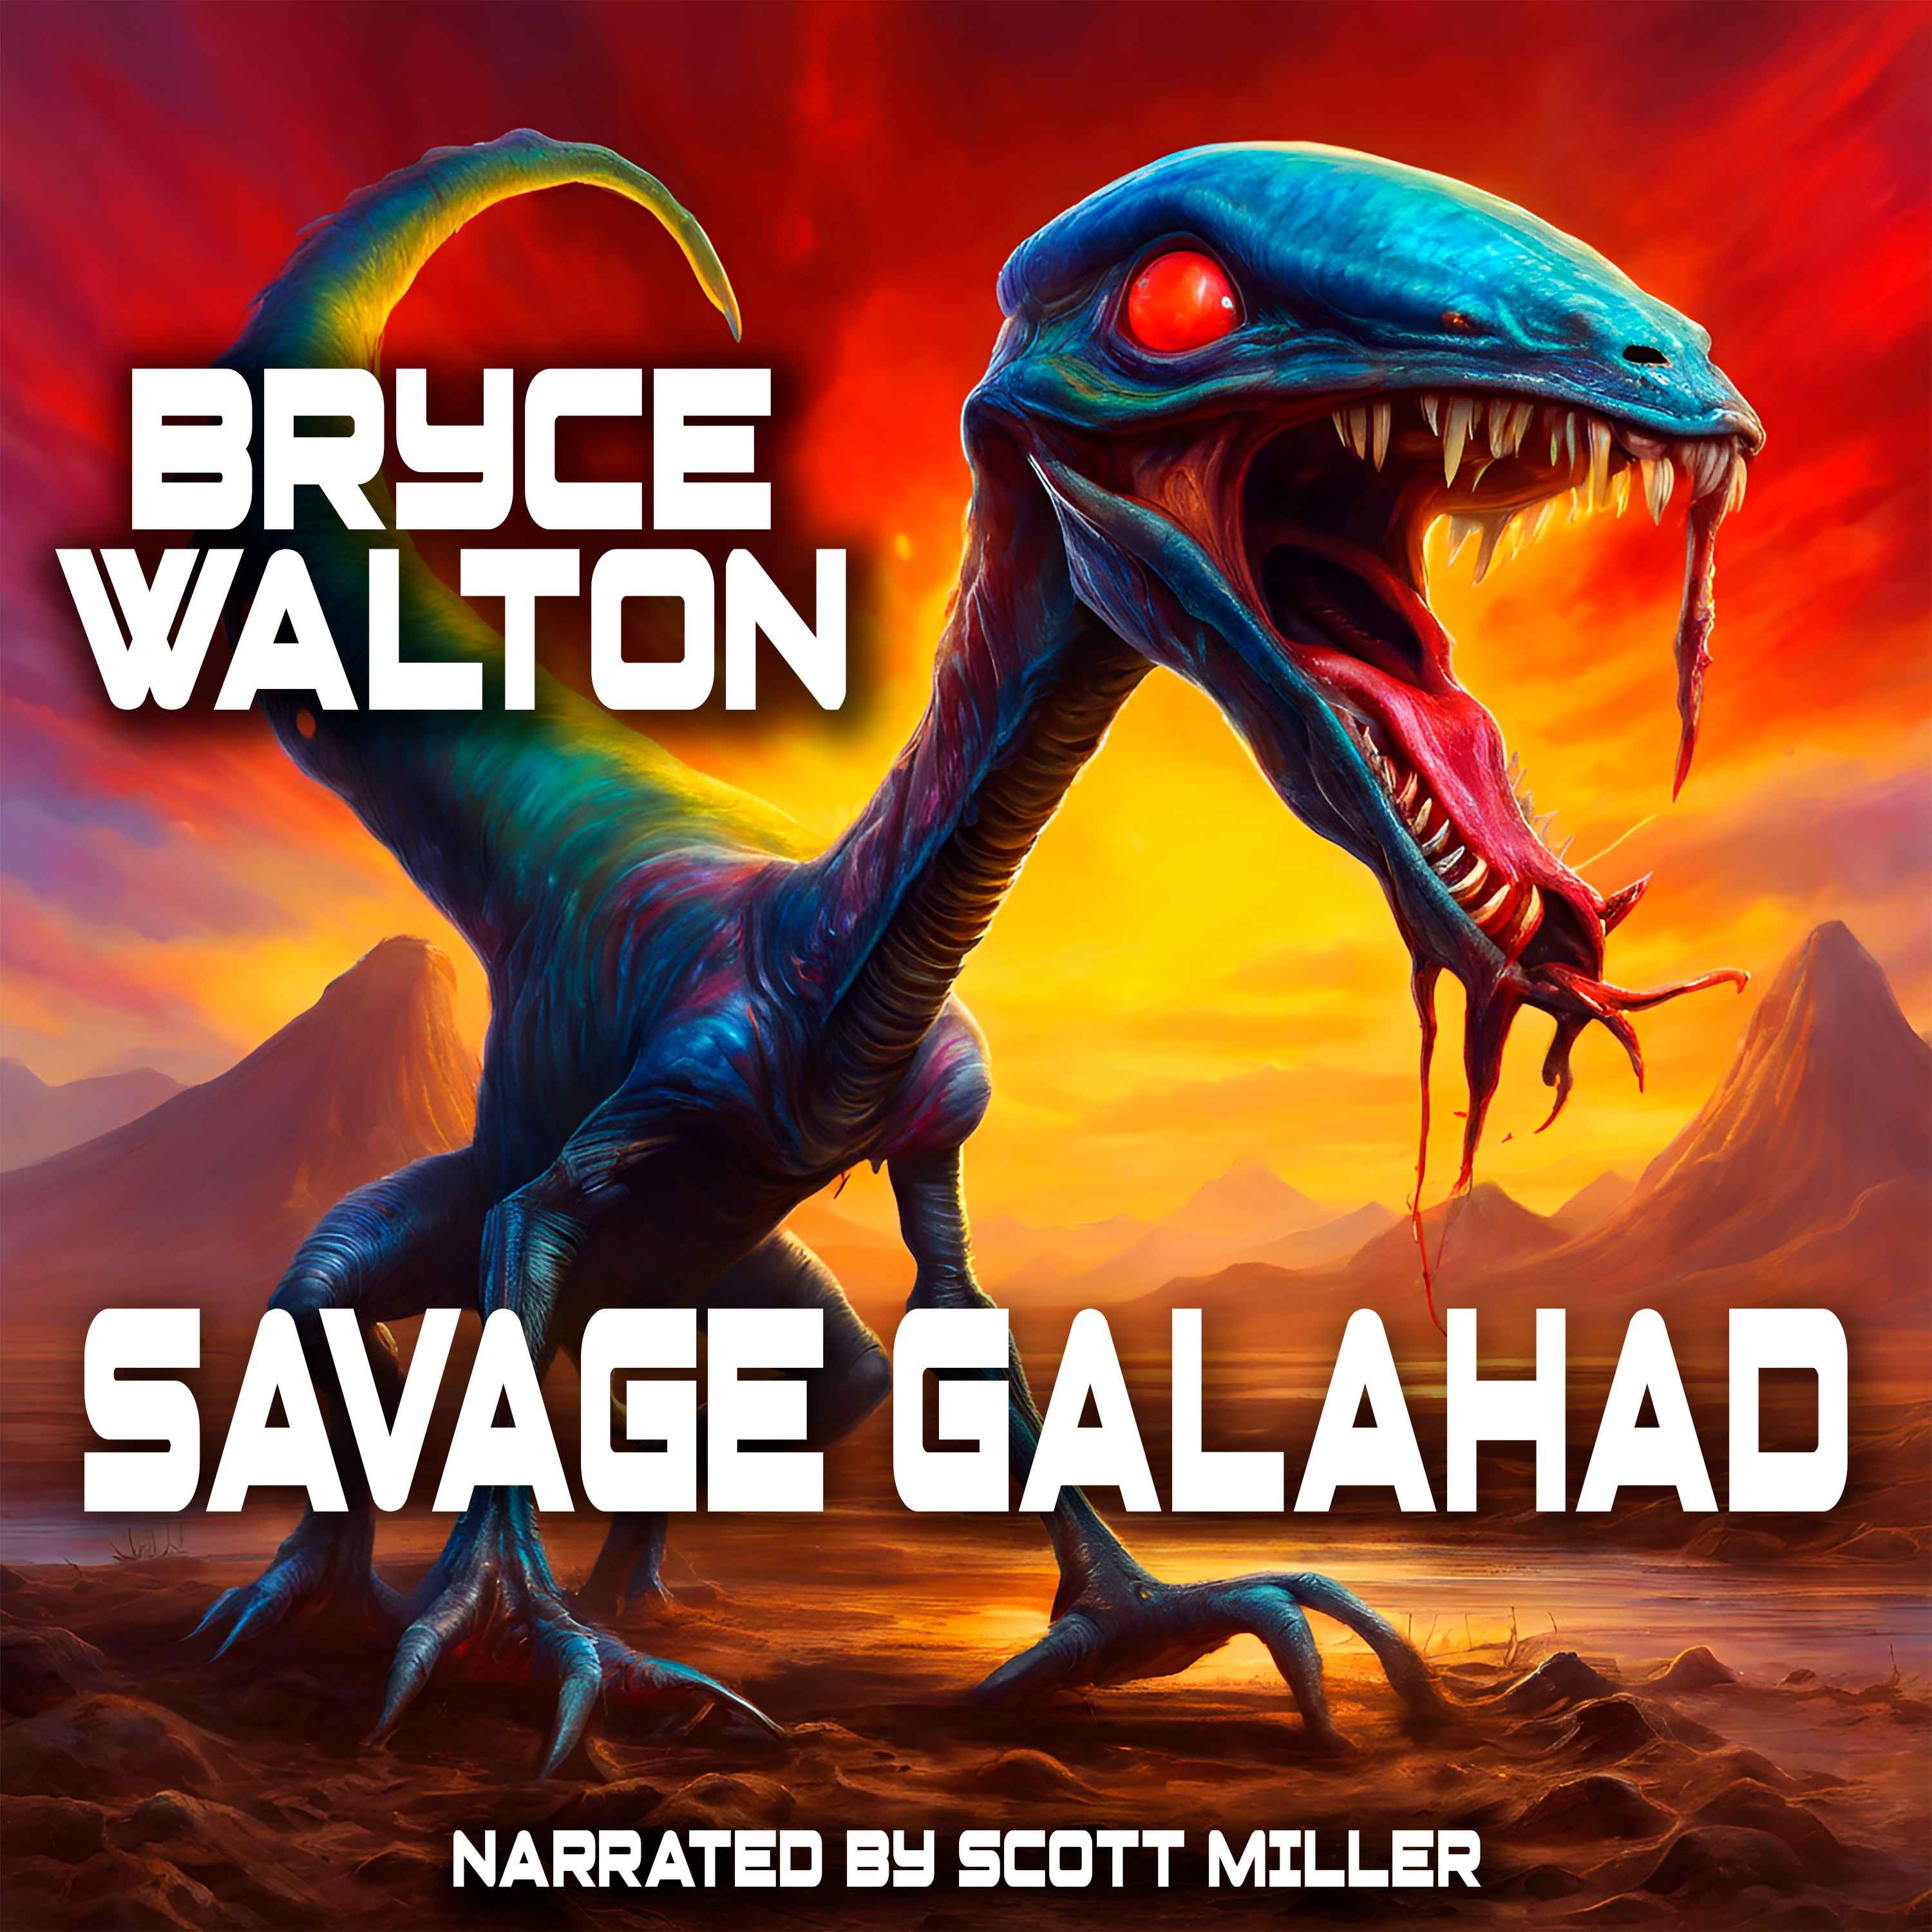 Savage Galahad by Bryce Walton - Sci-Fi Short Stories From the 1940s